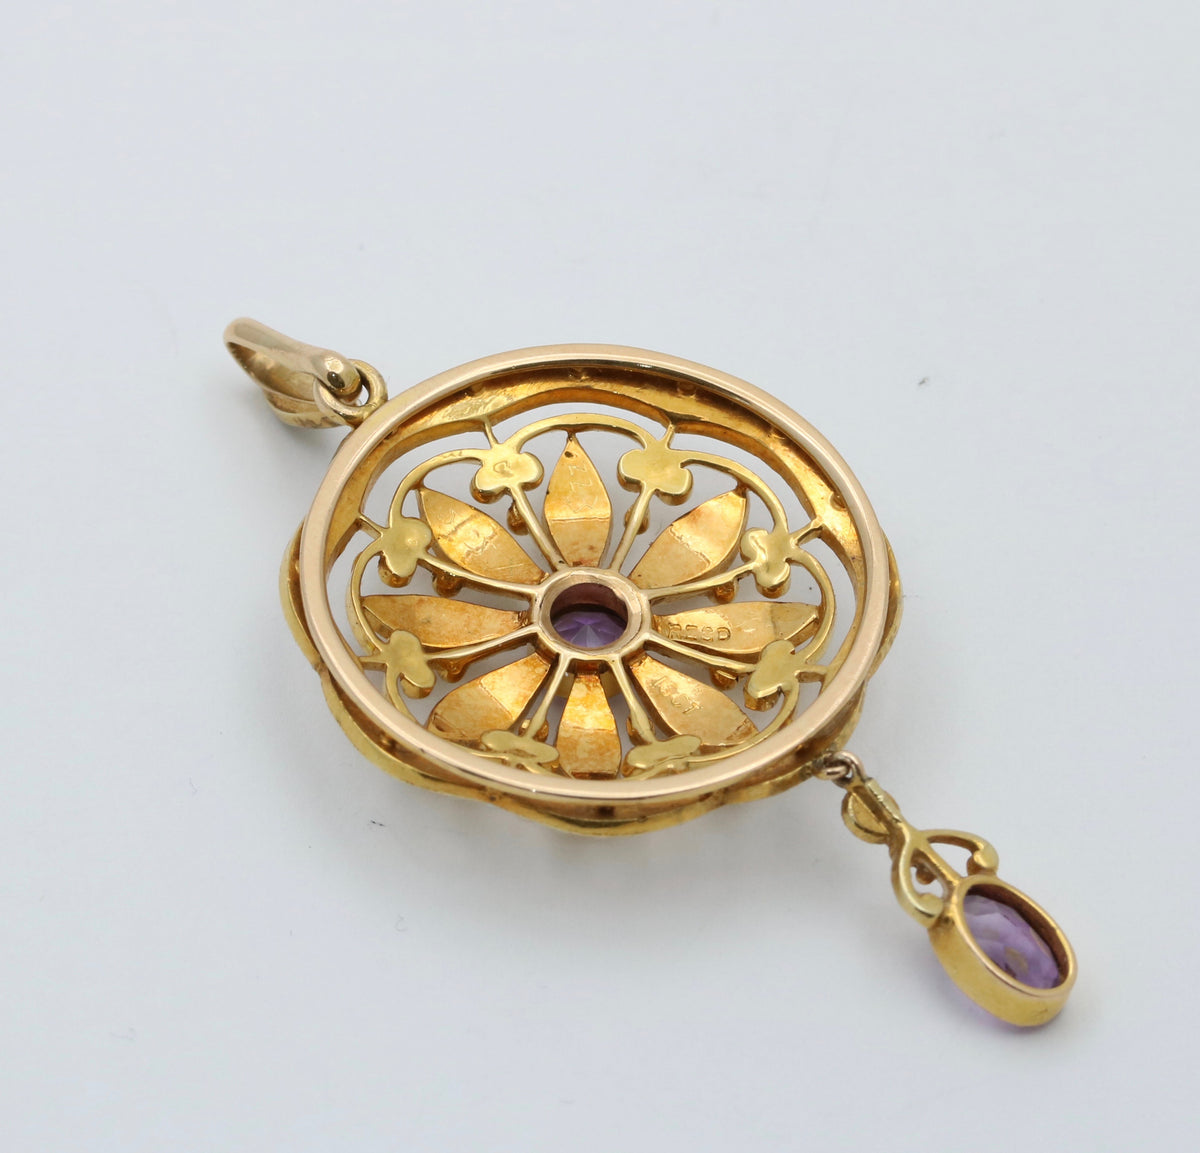 Edwardian Amethyst and Pearl 15K Gold Lavalier Pendant